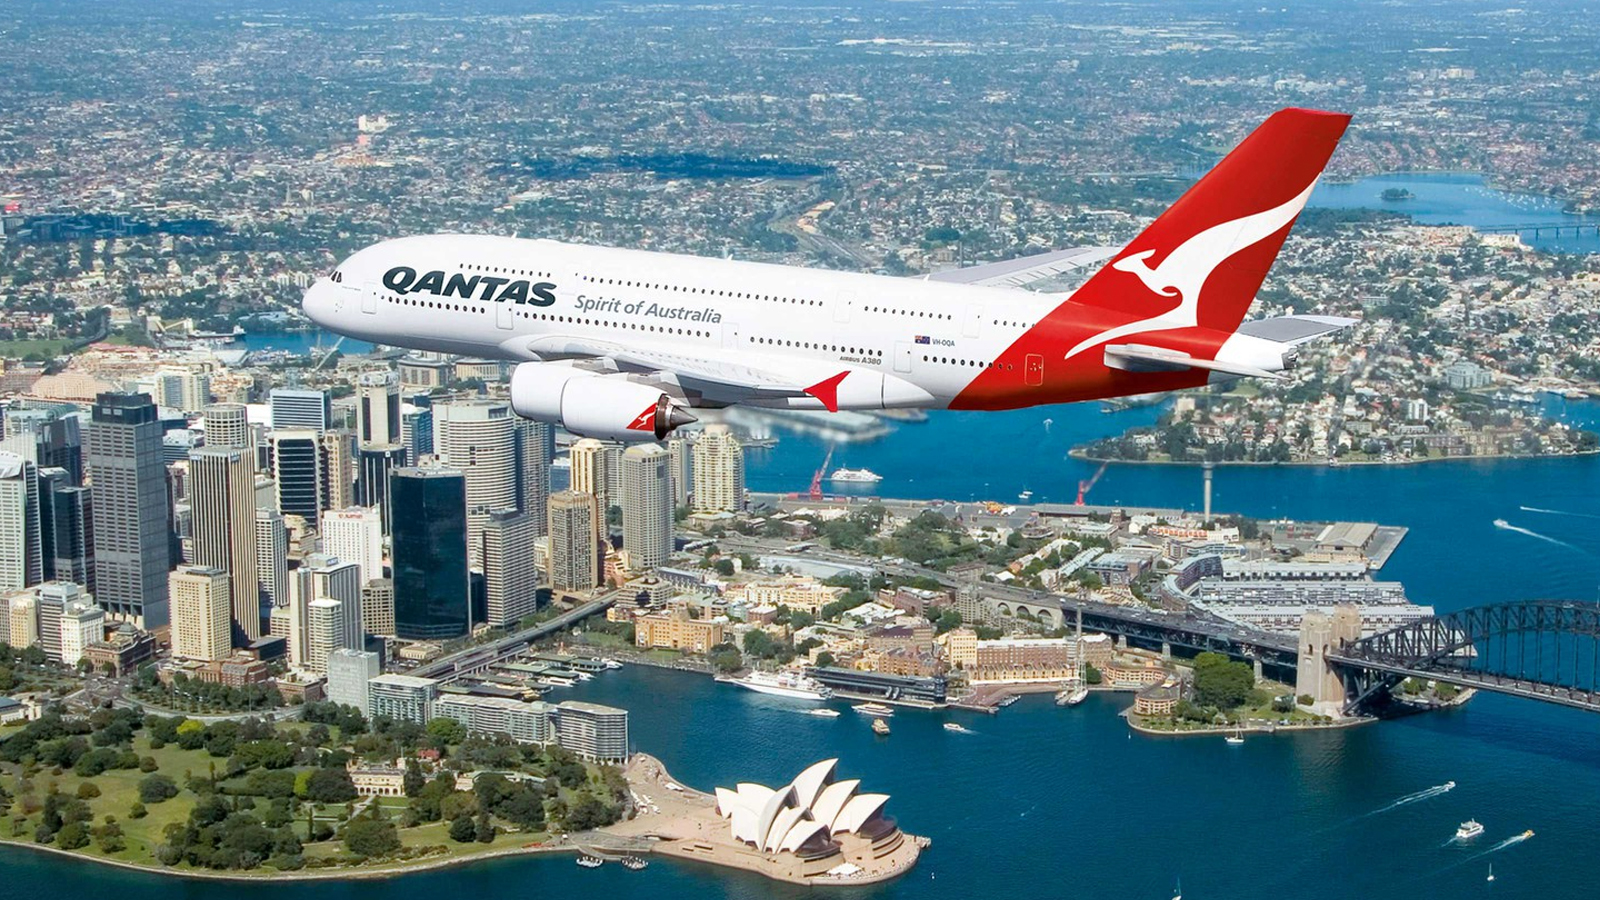 End Of An Era: Qantas Begins Scrapping Its Iconic A380s